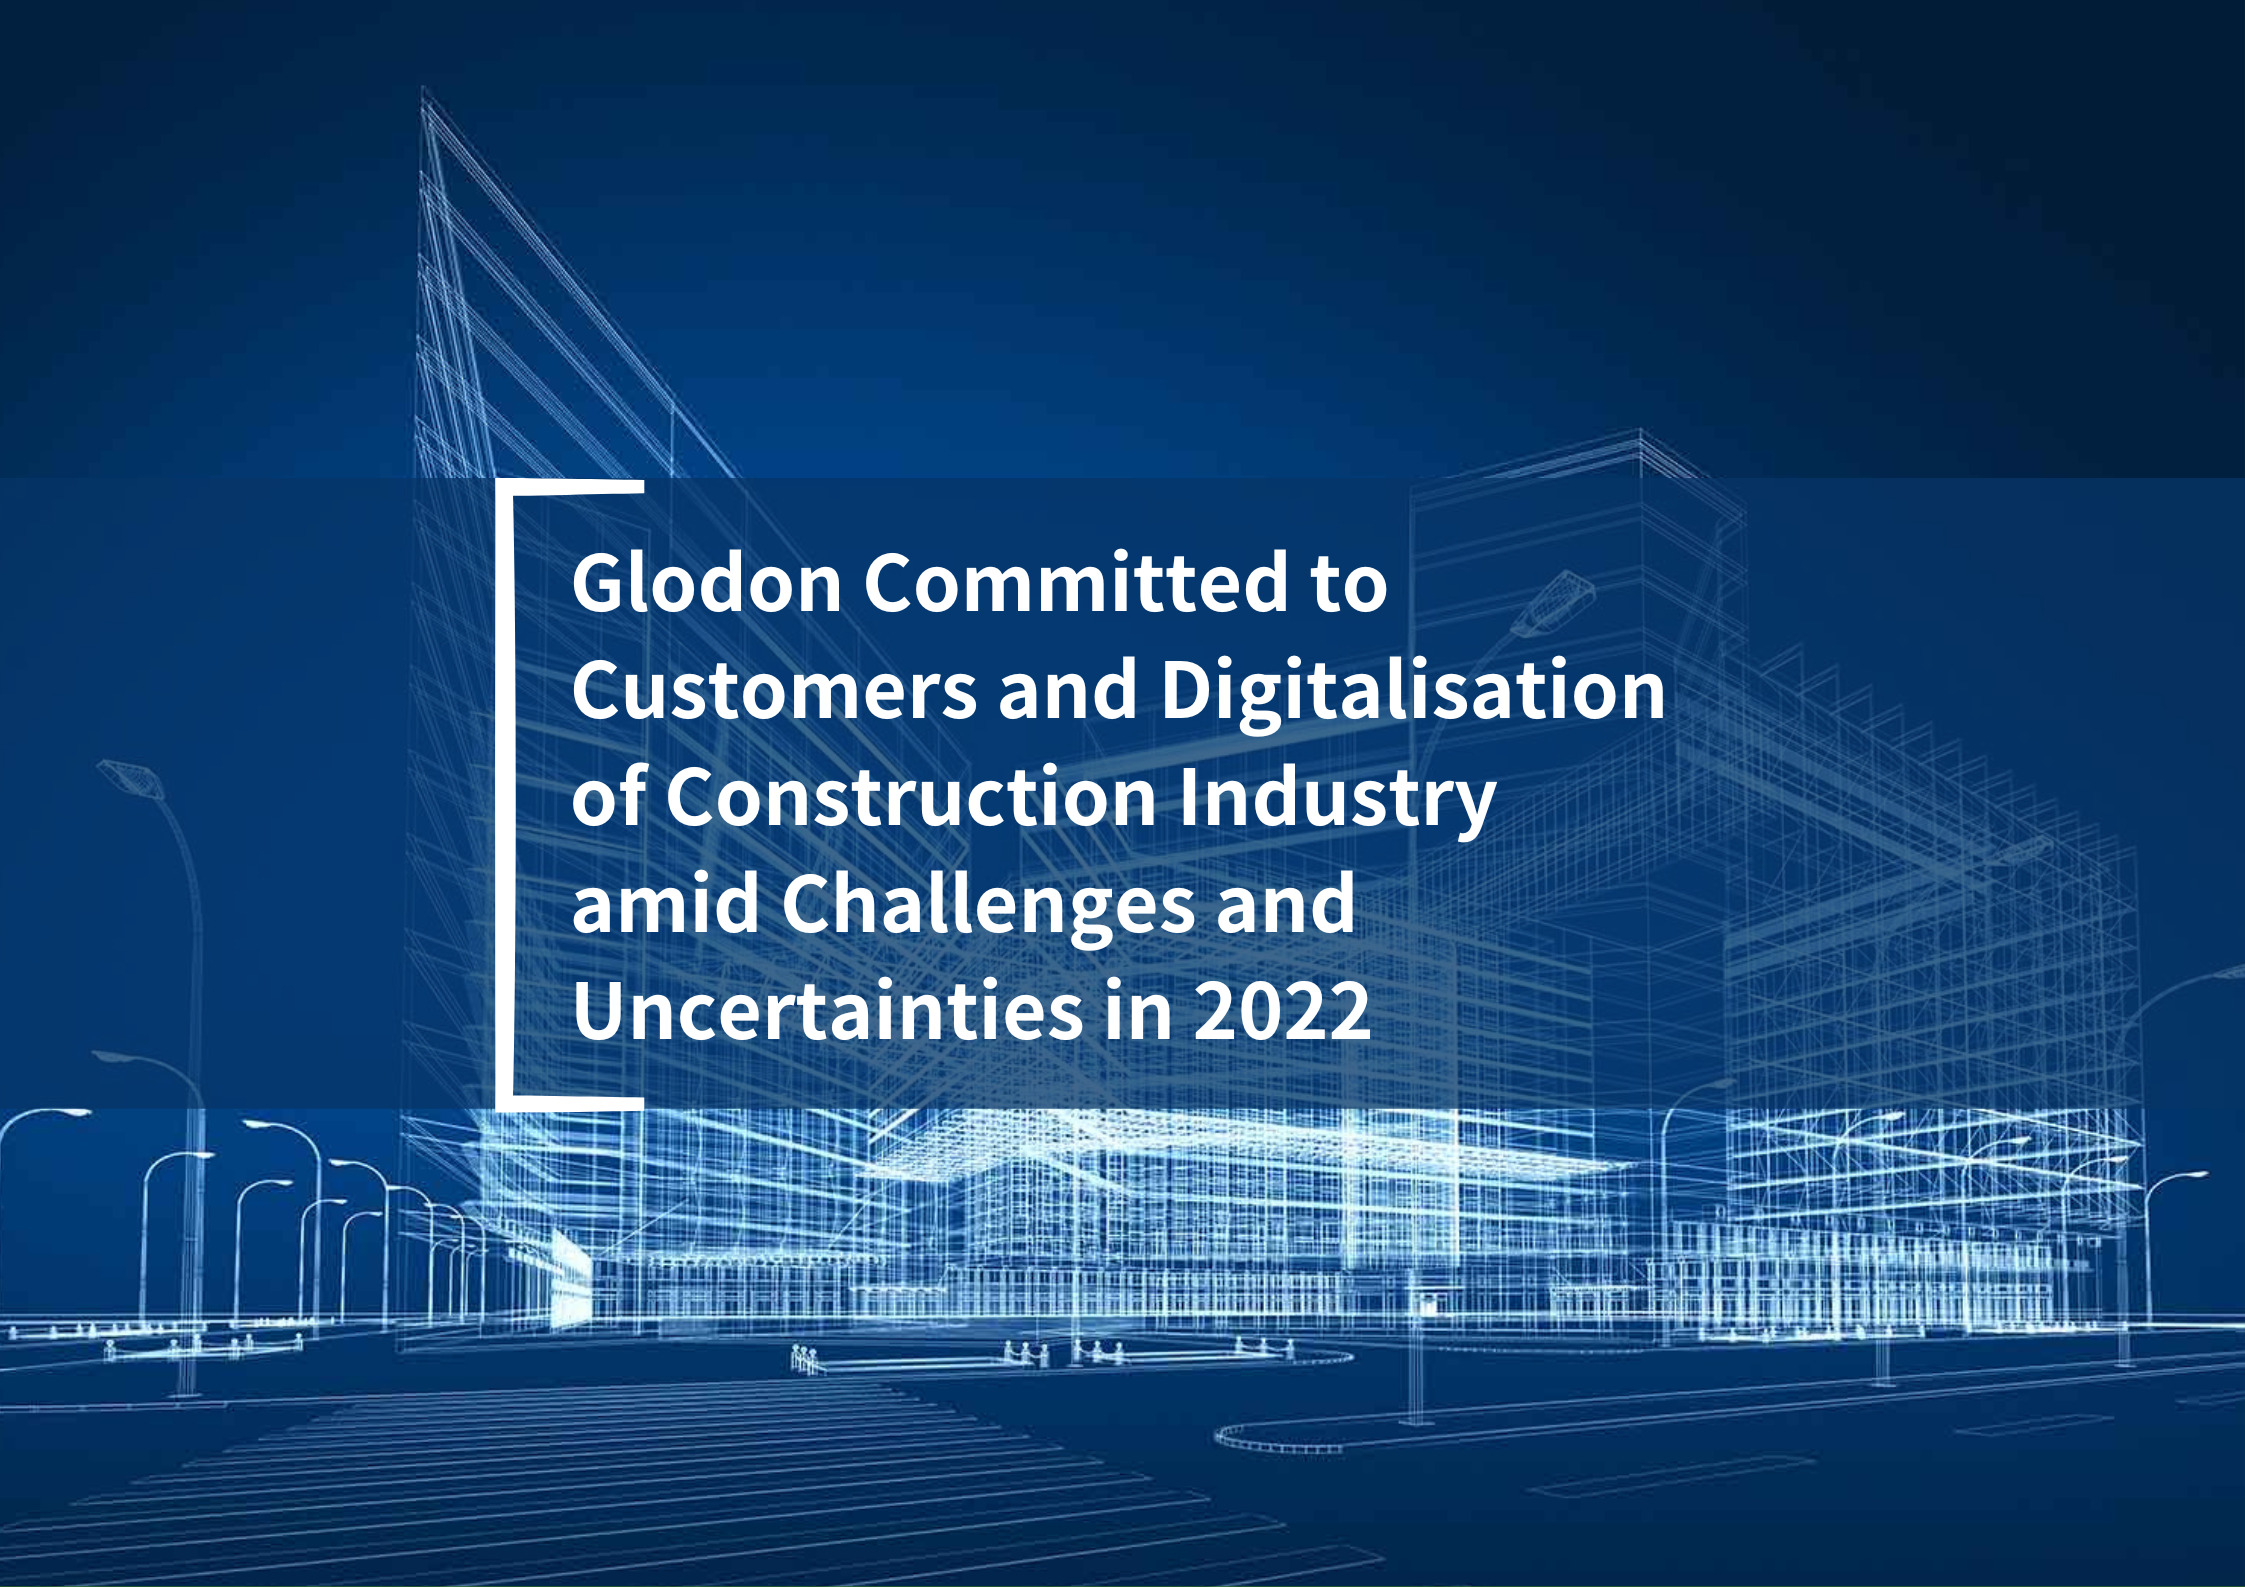 Glodon Committed to Customers and Digitalisation of Construction Industry amid Challenges and Uncertainties in 2022